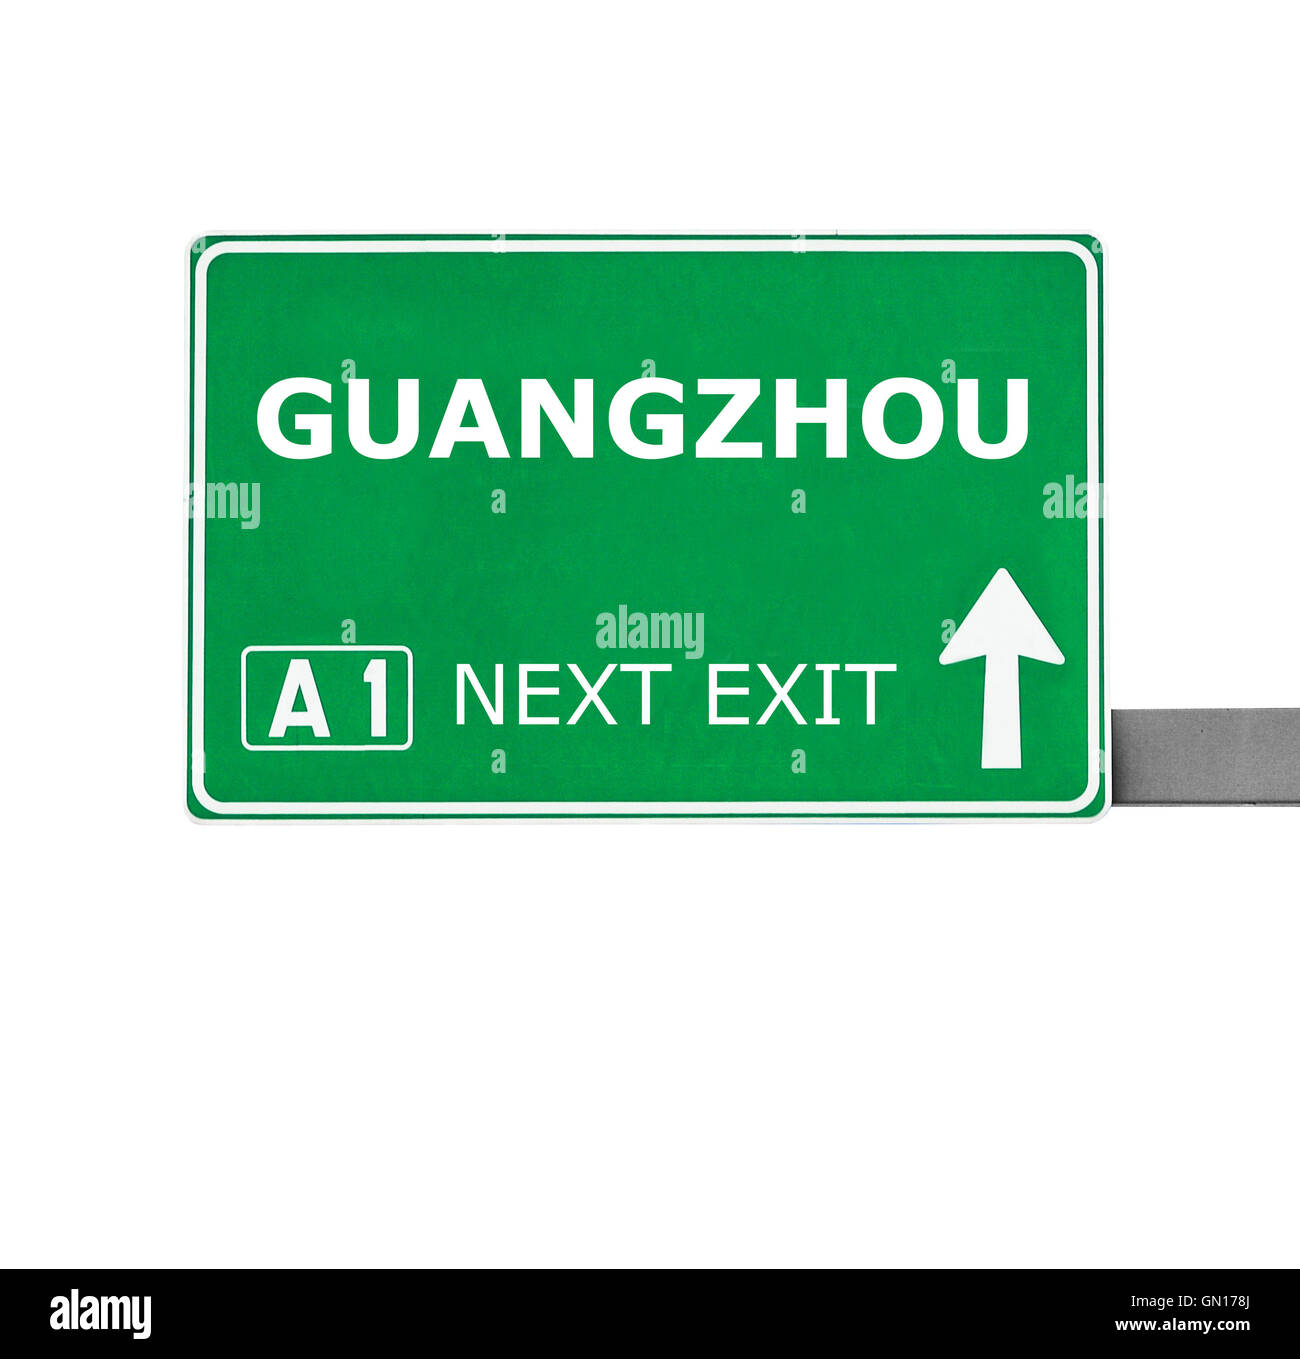 GUANGZHOU road sign isolated on white Banque D'Images